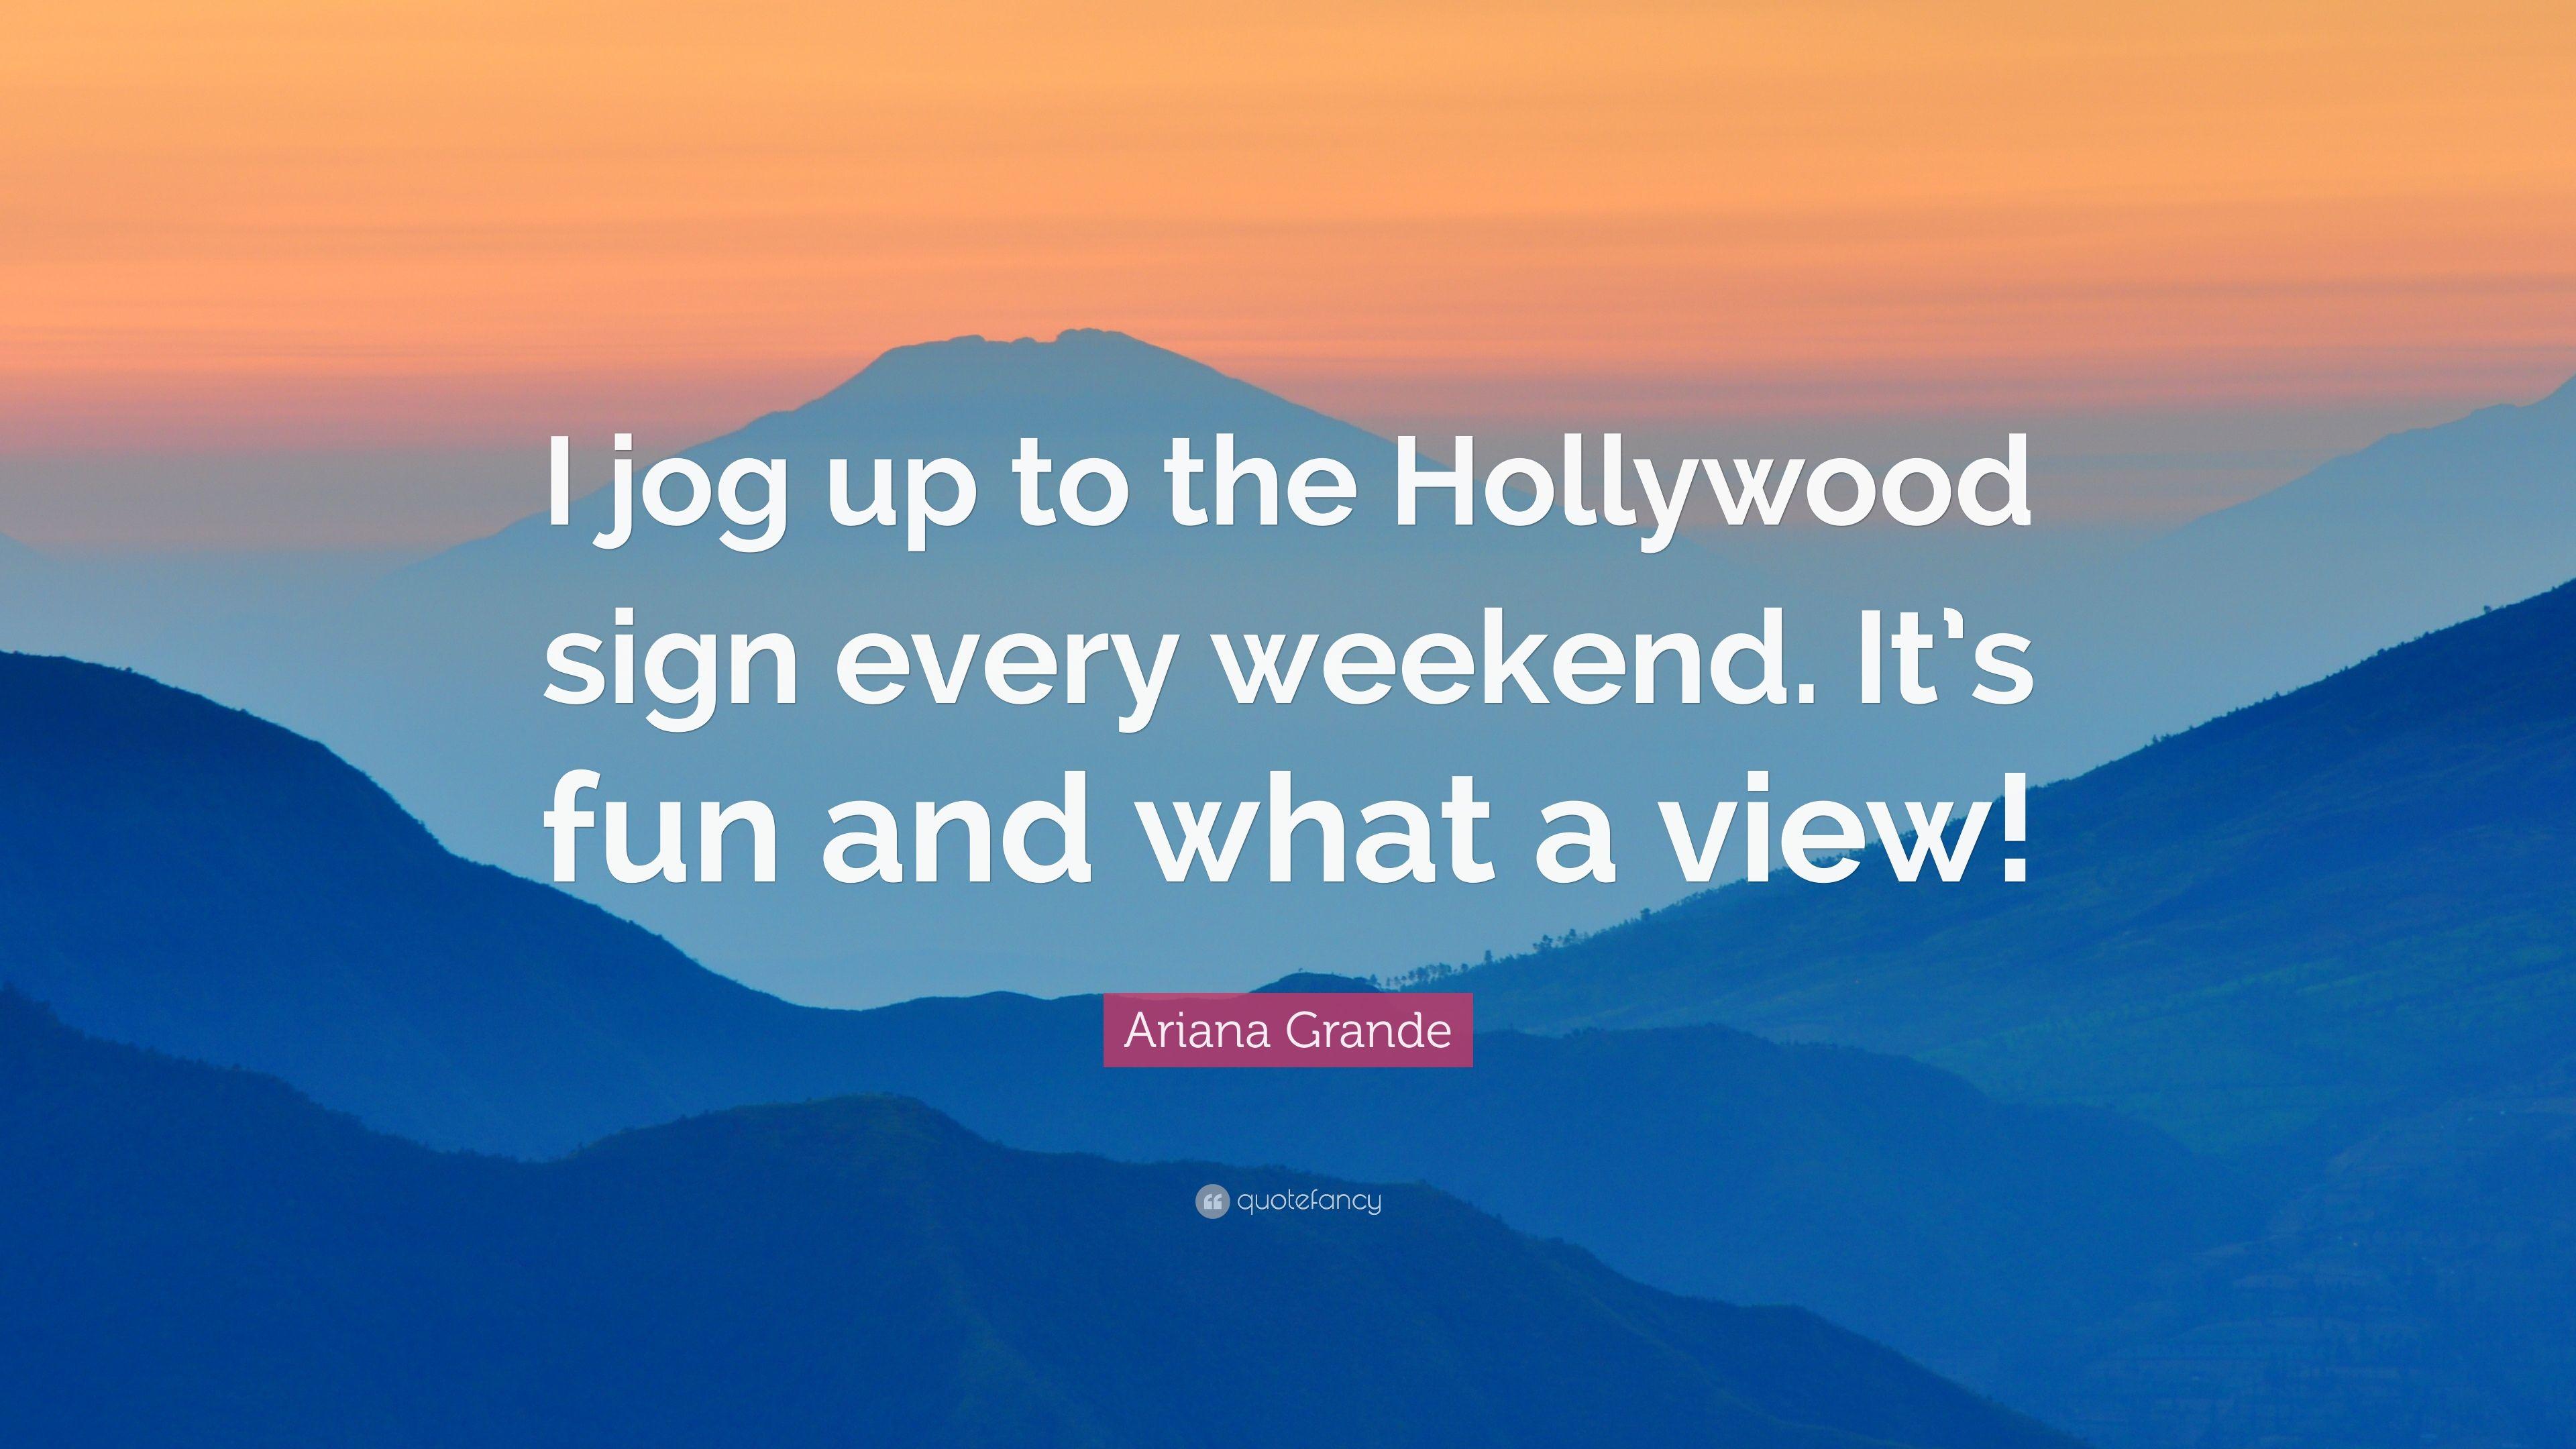 Ariana Grande Quote: “I jog up to the Hollywood sign every weekend